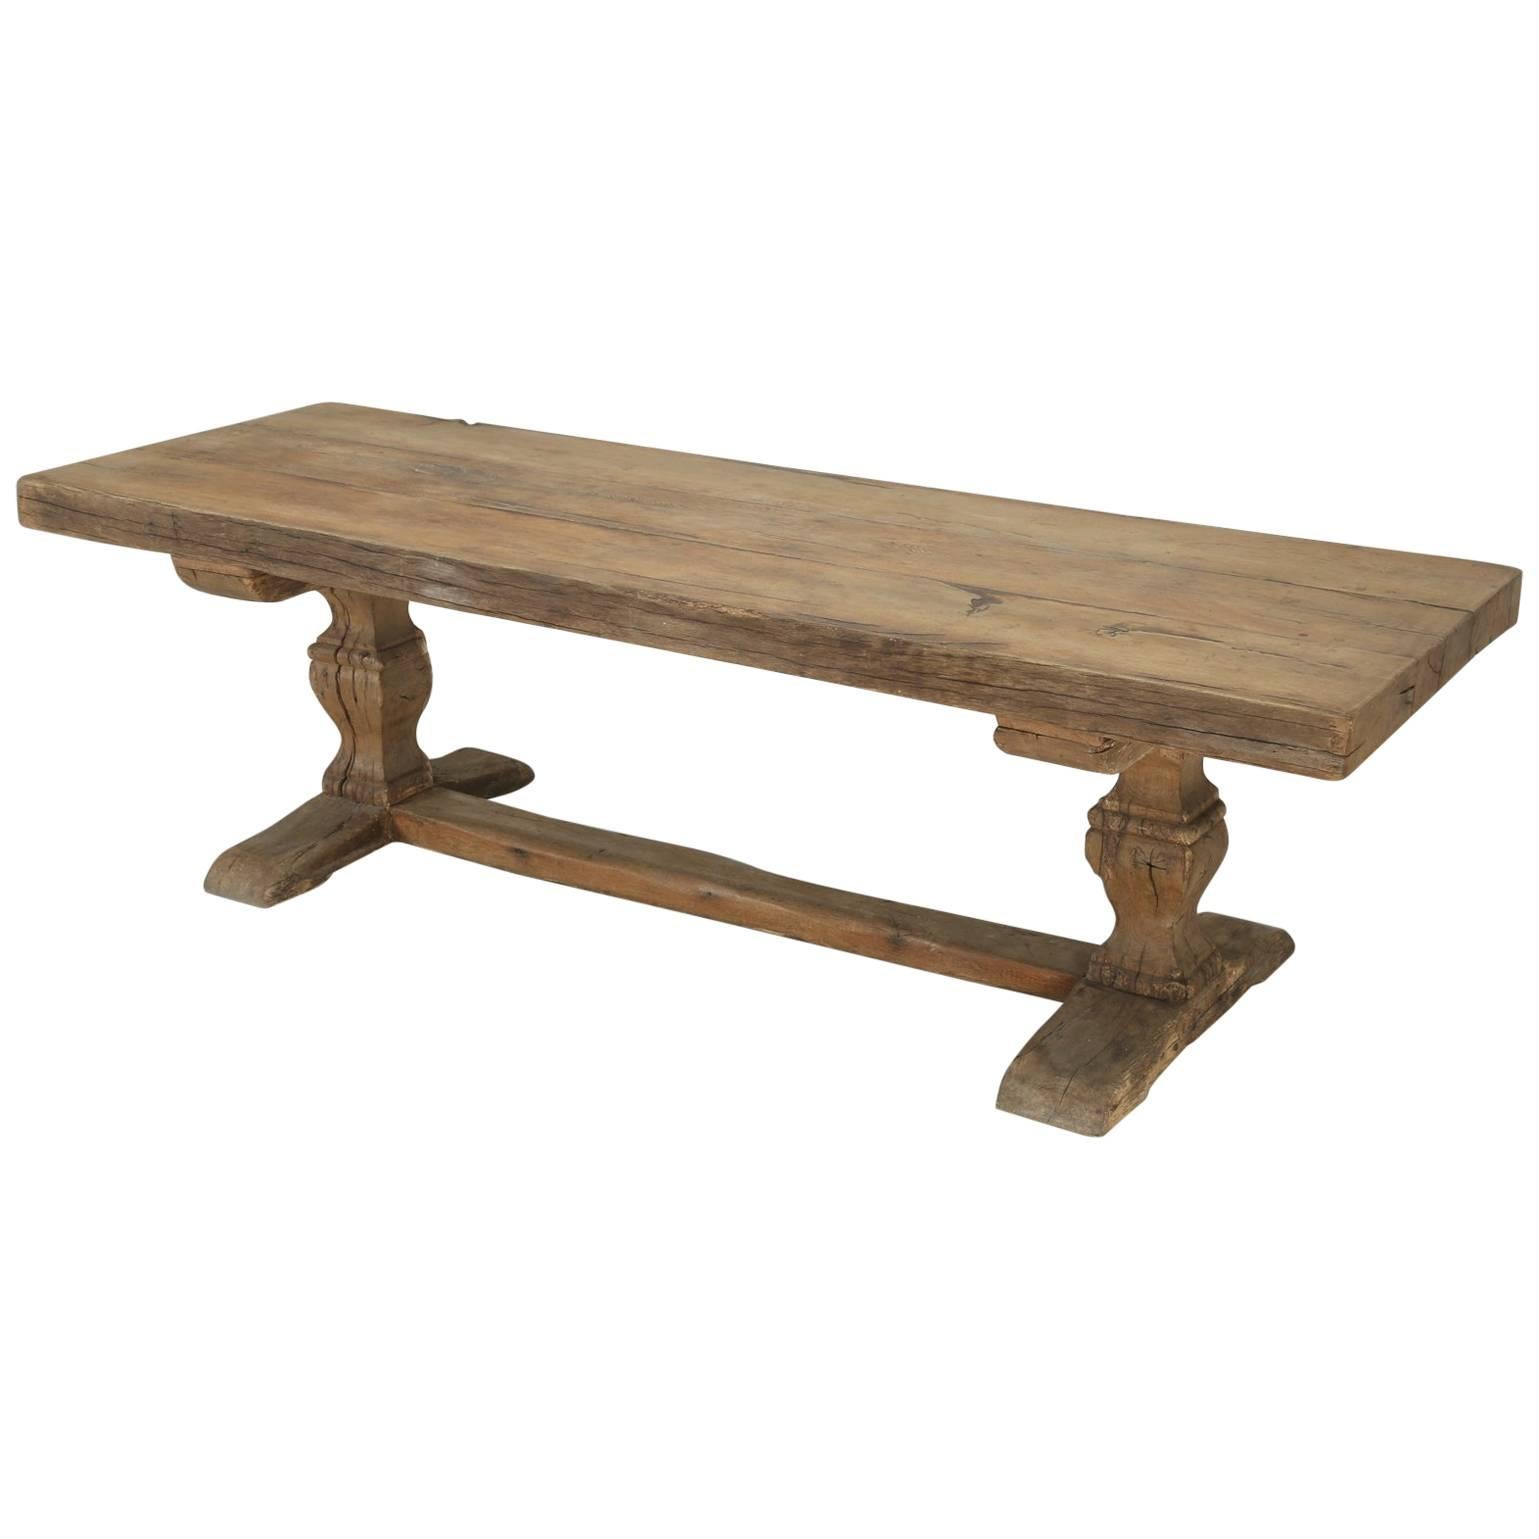 Antique French Trestle Table, circa 300 Years Old